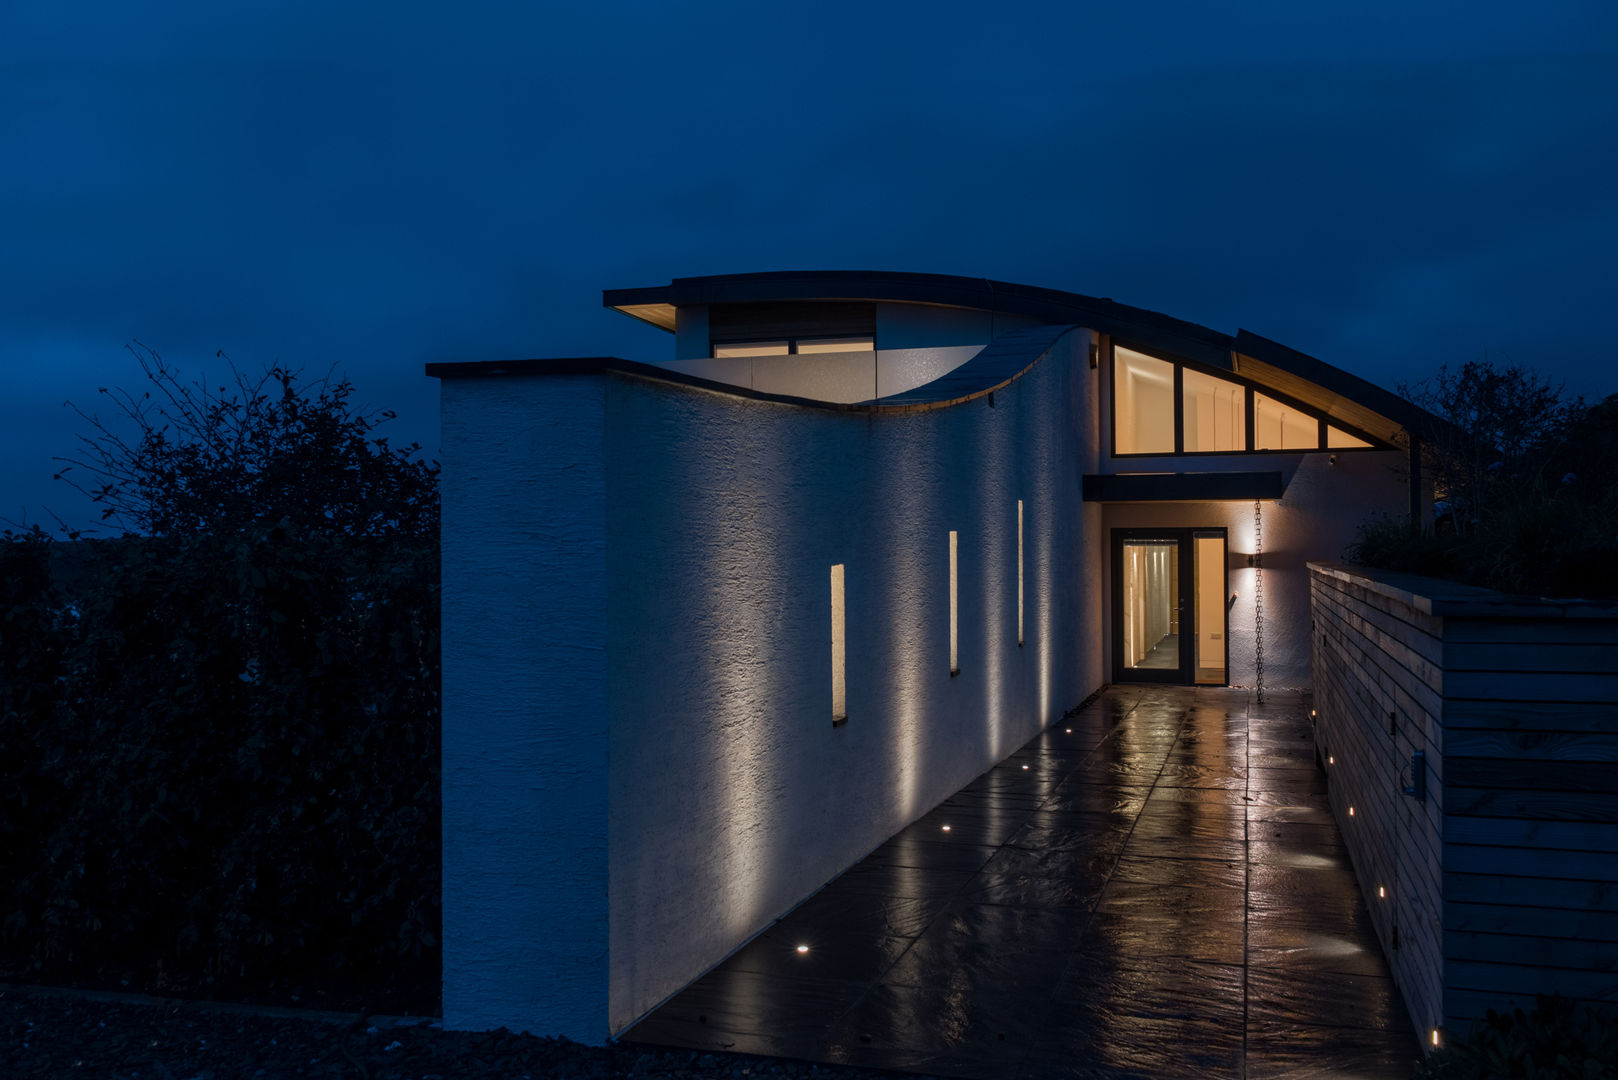 New Contemporary House, Polzeath, Cornwall Arco2 Architecture Ltd Maisons modernes Architects Cornwall, architecture Cornwall, arco2 architects, eco friendly architects, sustainable architects, sustainable architecture, architecture by the sea, beach house architecture,